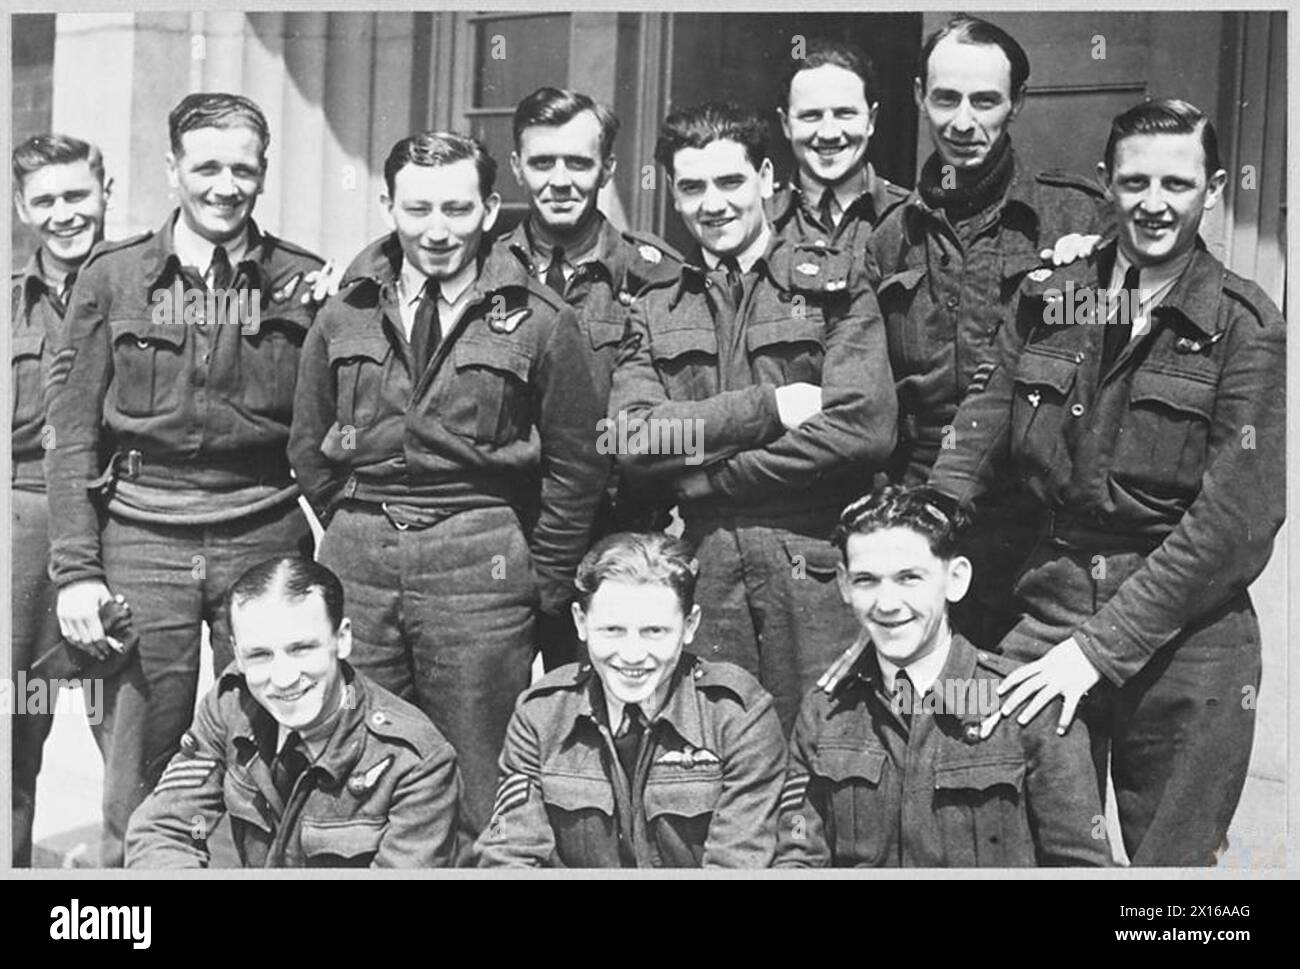 MEN BEHIND BRITAIN'S BOMBING OFFENSIVE : SERGEANT PILOTS AND CREWS [Picture issued 1942] - Sergeant pilots and crews enjoying the sun while off duty at an R.A.F. bomber Station in the U.K. 1. Sergeant W.G. Foster 2. Sergeant J.R. Brook, 3. Sergeant J. Carter 4. Sergeant G.P. Lemoine, 5. Sergeant J. Fisher 6. Sergeant K. Richards 7. Sergeant R.W. Pratt, 8. Sergeant C.F. Norman 9. Sergeant G. Ellis 10. Sergeant R.V. Morrison 11. Sergeant H.E. Allen , Royal Air Force Stock Photo